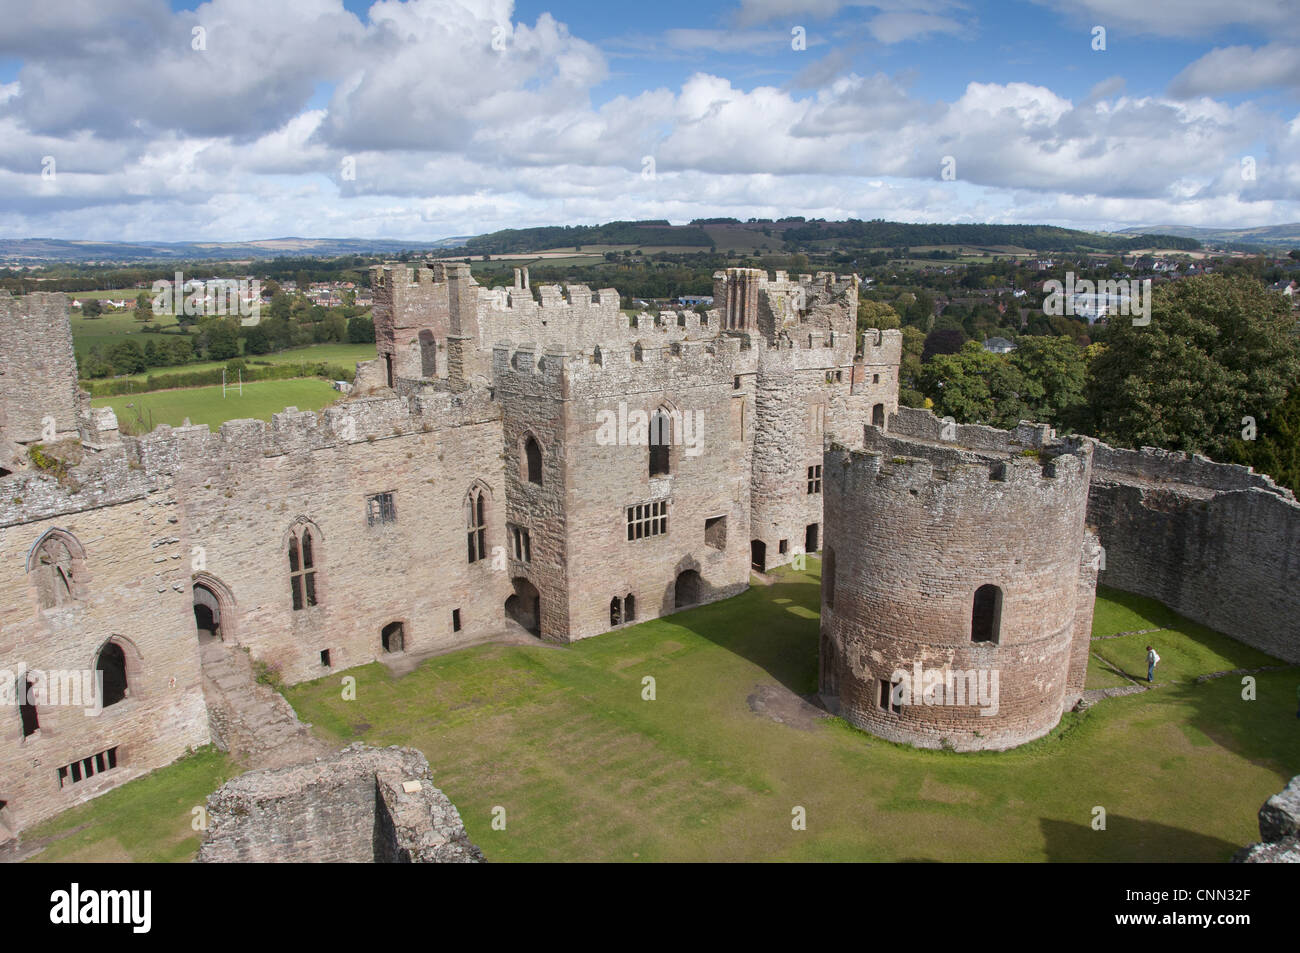 View of partially ruined castle, Ludlow Castle, Ludlow, Shropshire, England, september Stock Photo